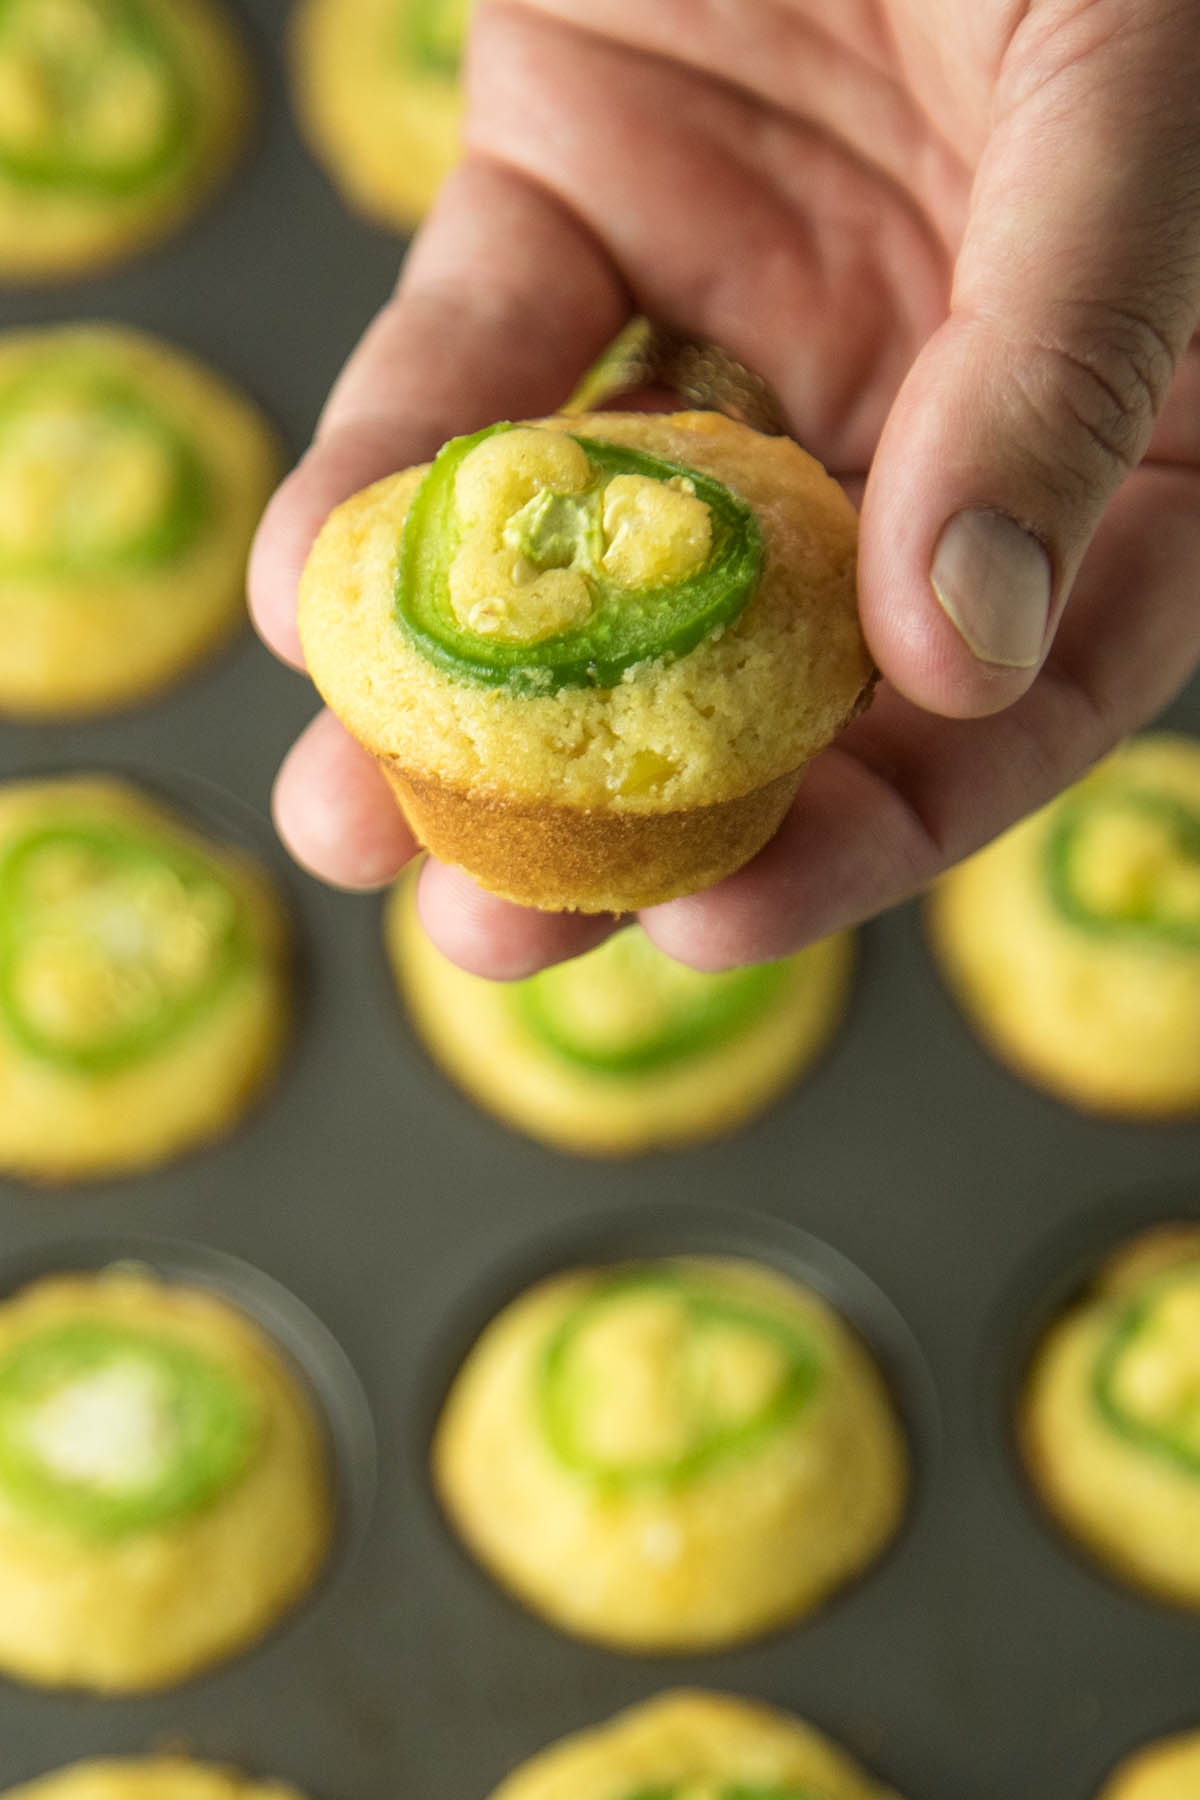 Holding one of the Cheesy Jalapeno Popper Cornbread Muffins